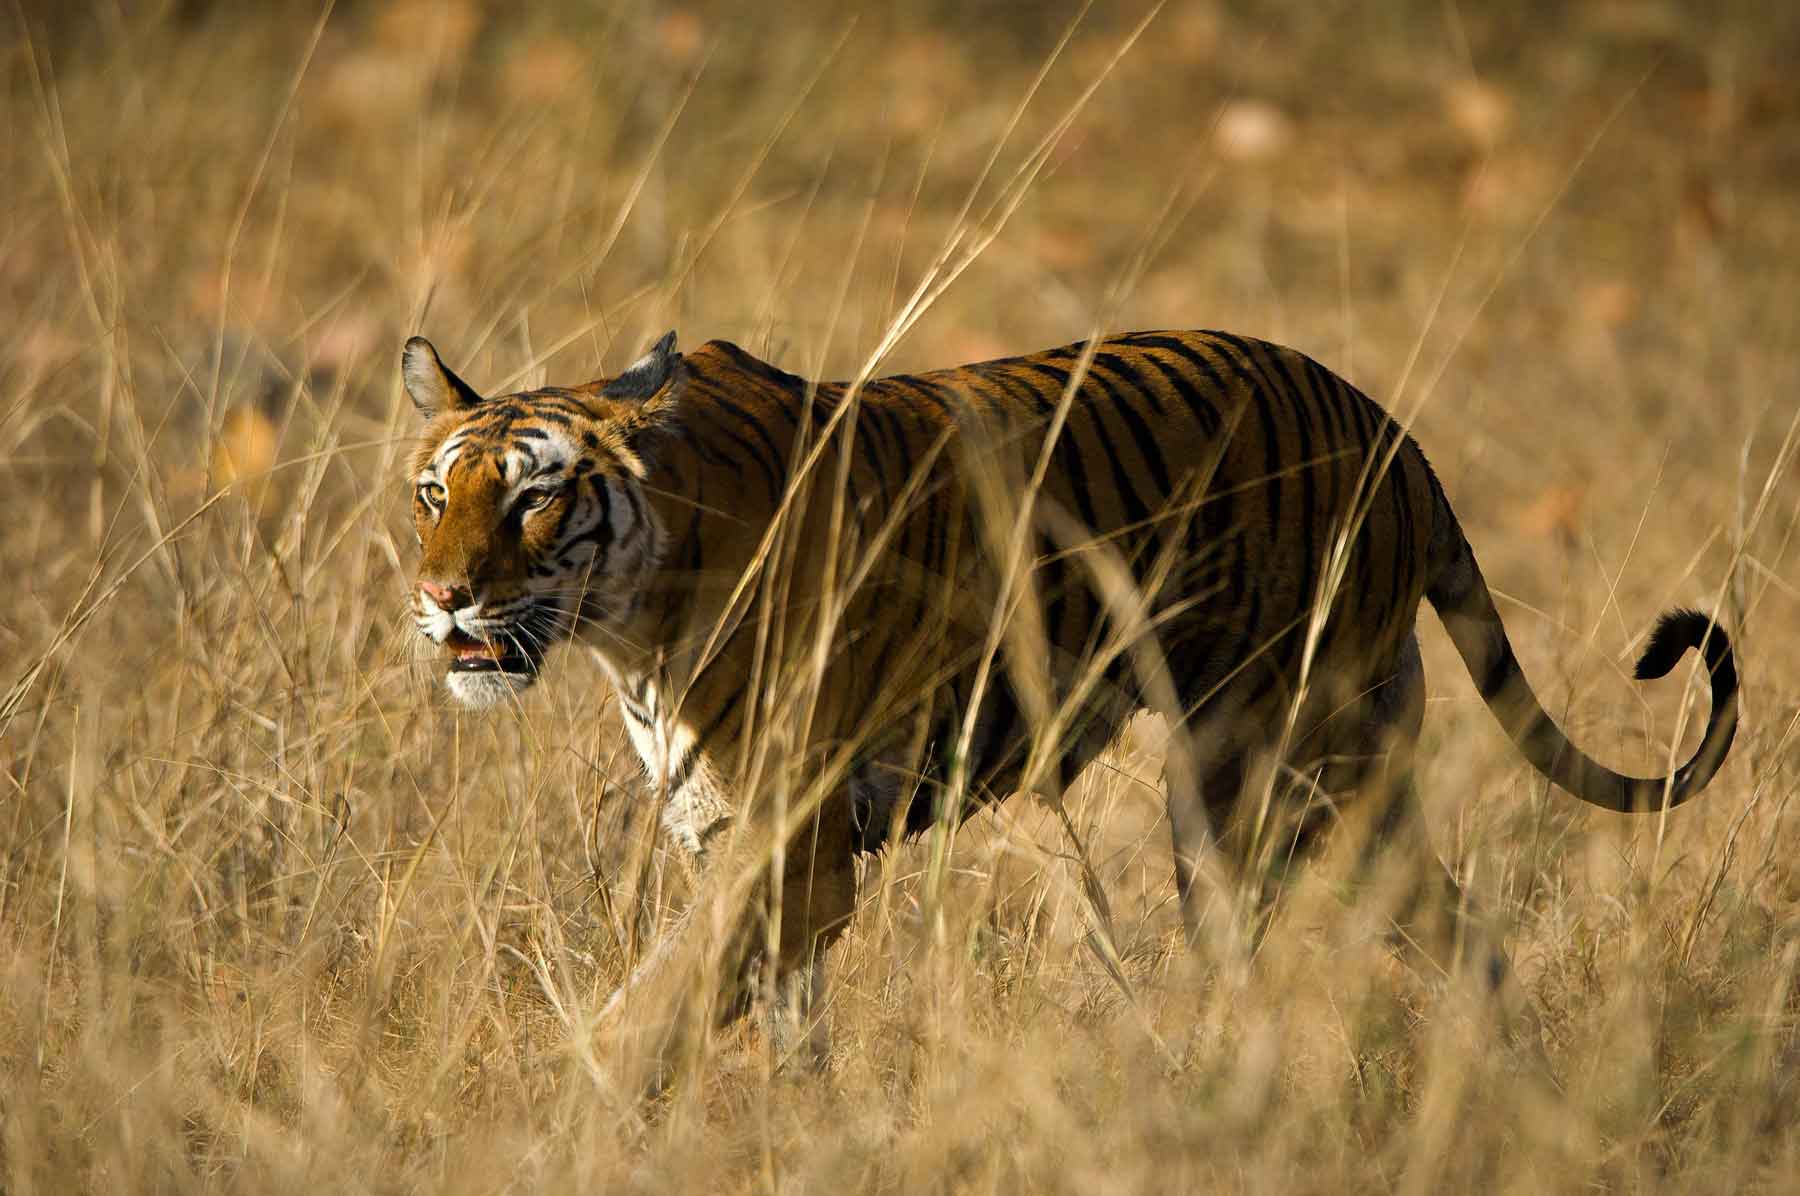 Tigers in National Park in India